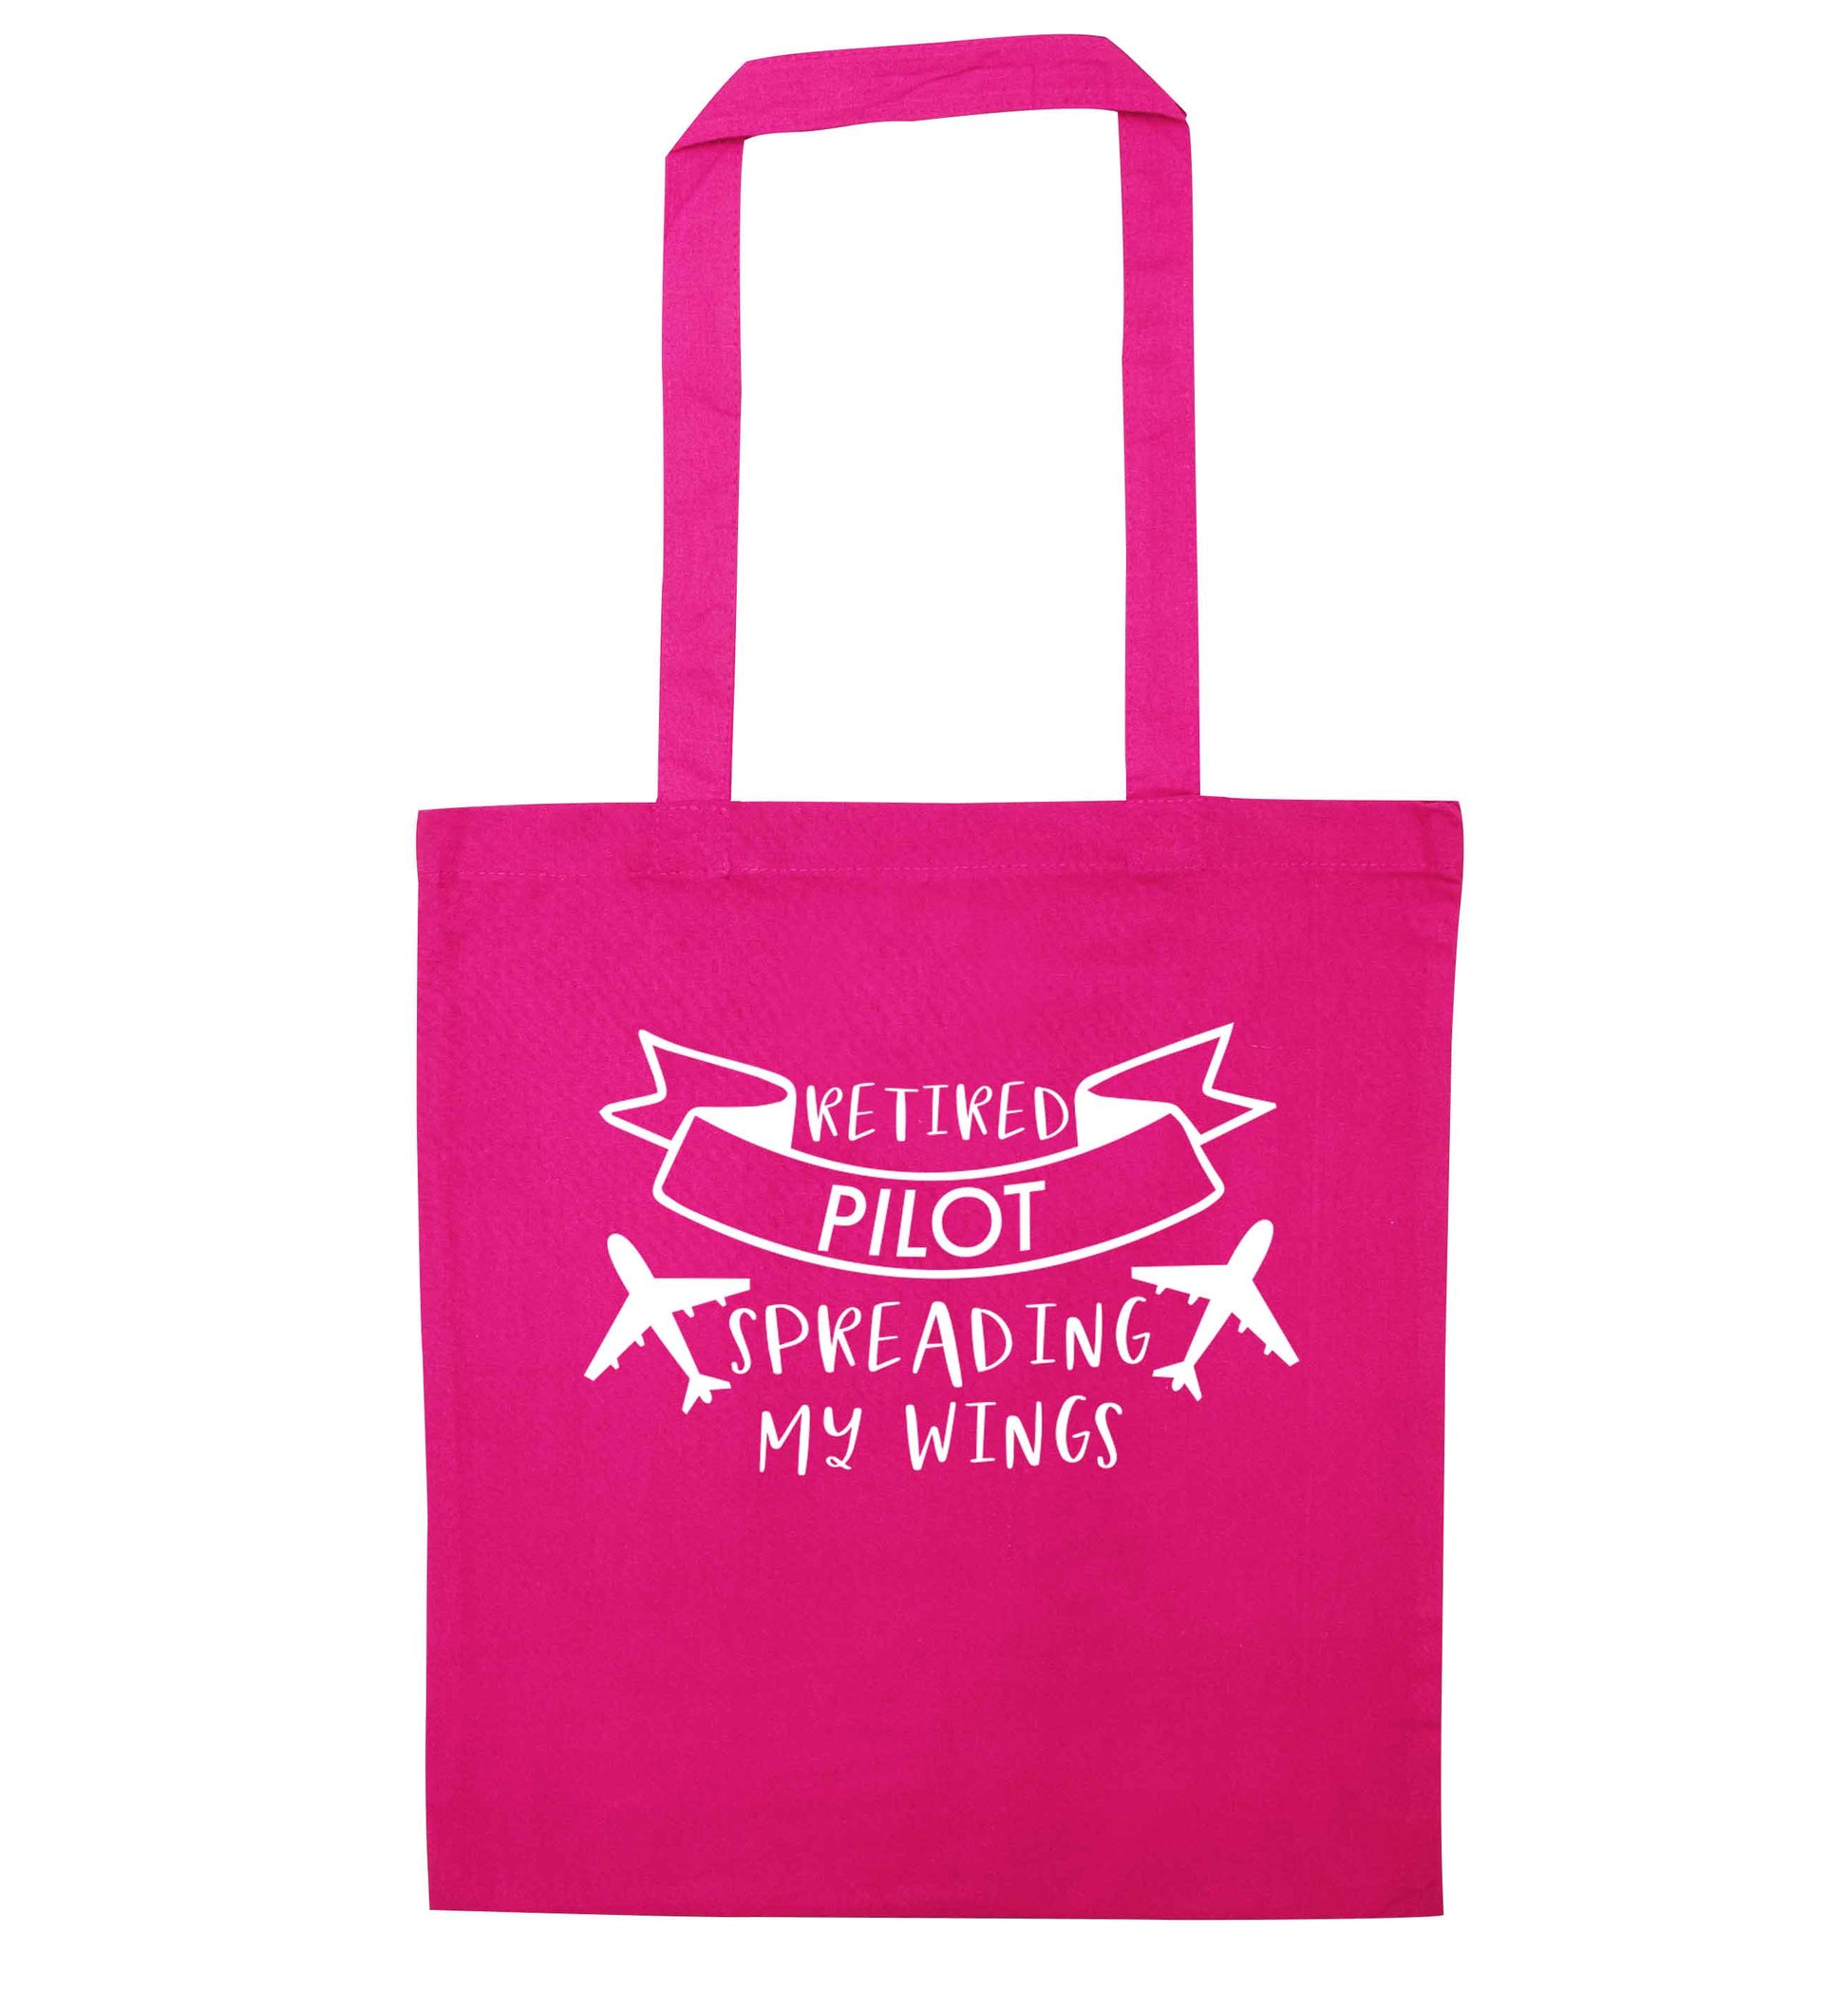 Retired pilot spreading my wings pink tote bag